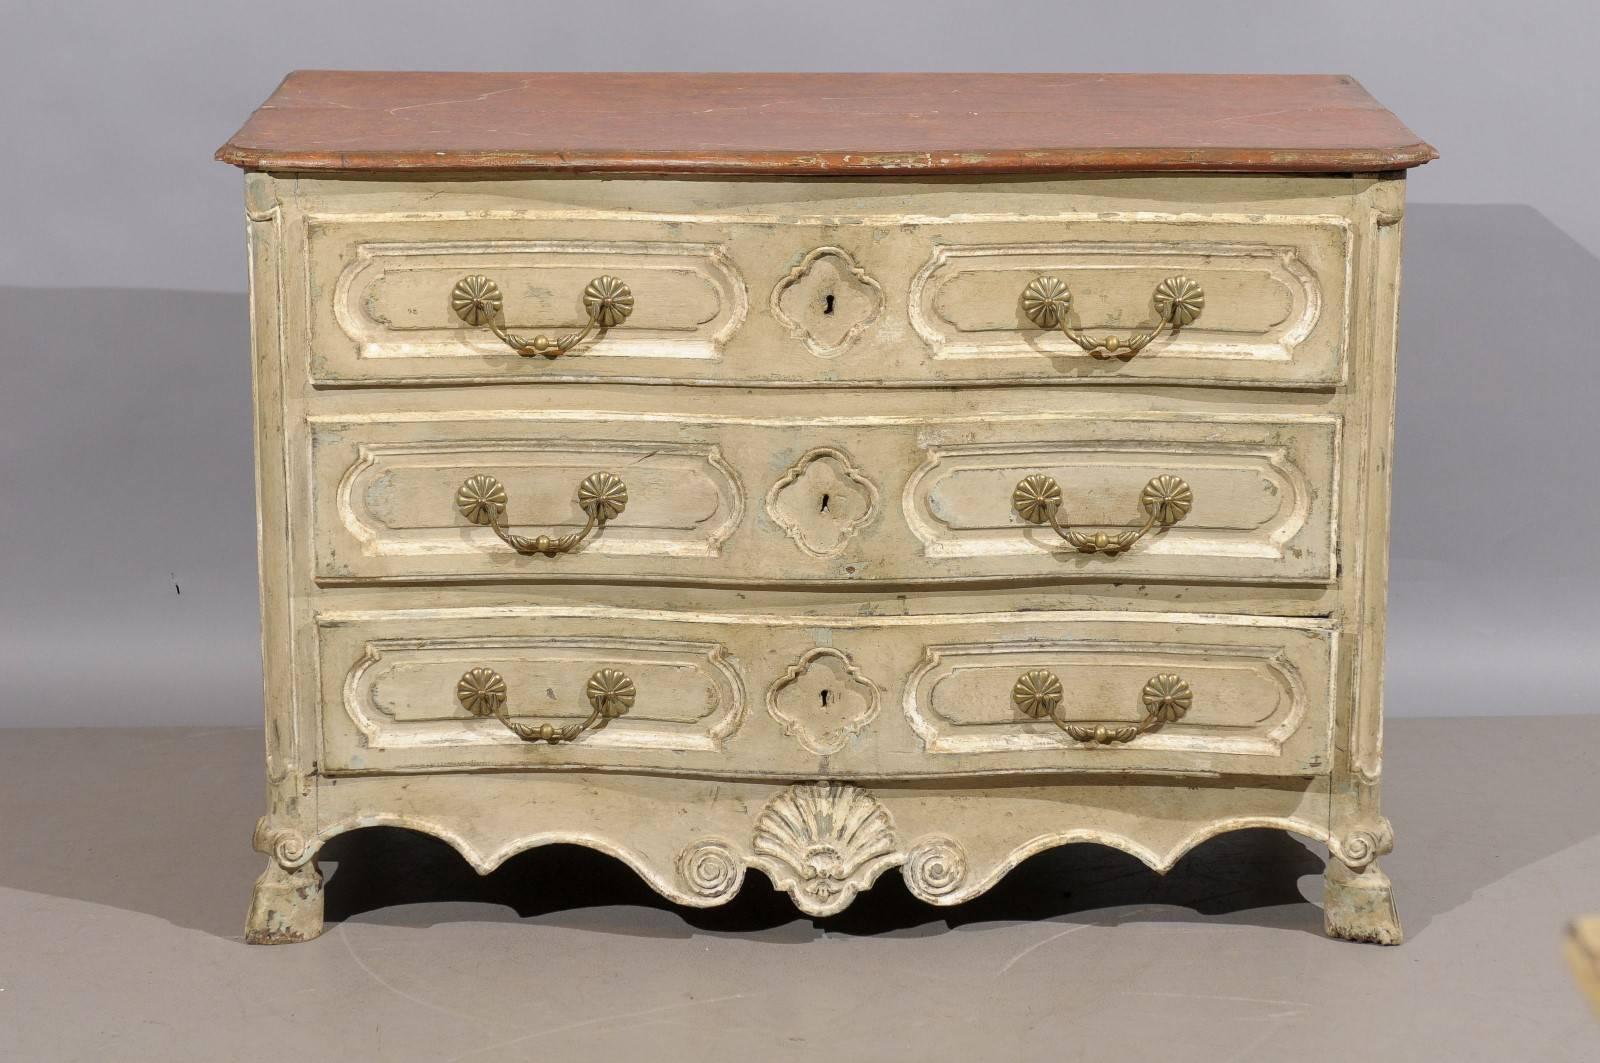 Large 18th century French Louis XV, Regence period three-drawer commode with hoof feet and faux marble top.